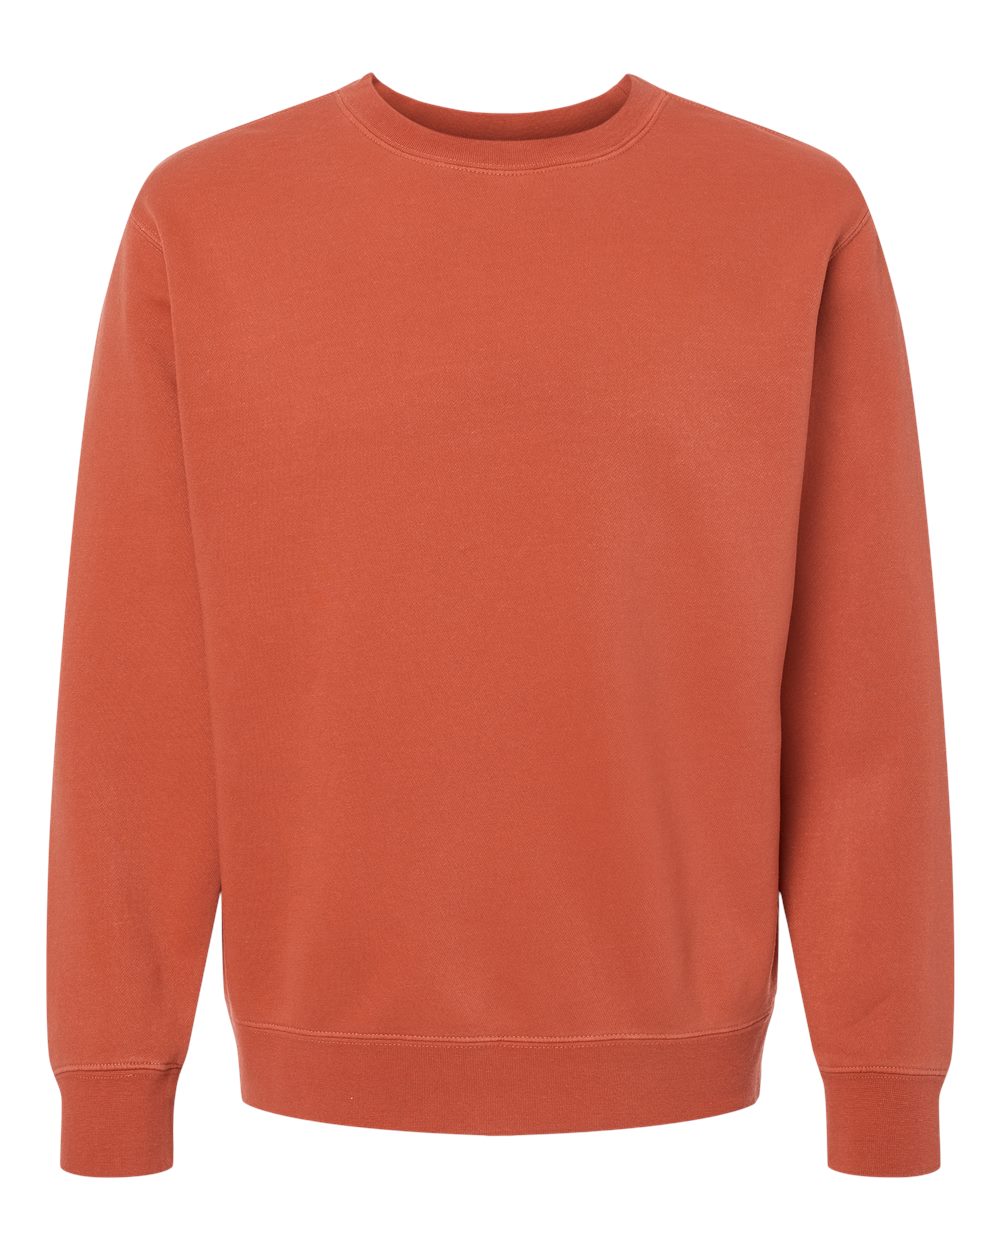 SDD Measure Once Pigment Dyed Crew Neck Sweatshirt